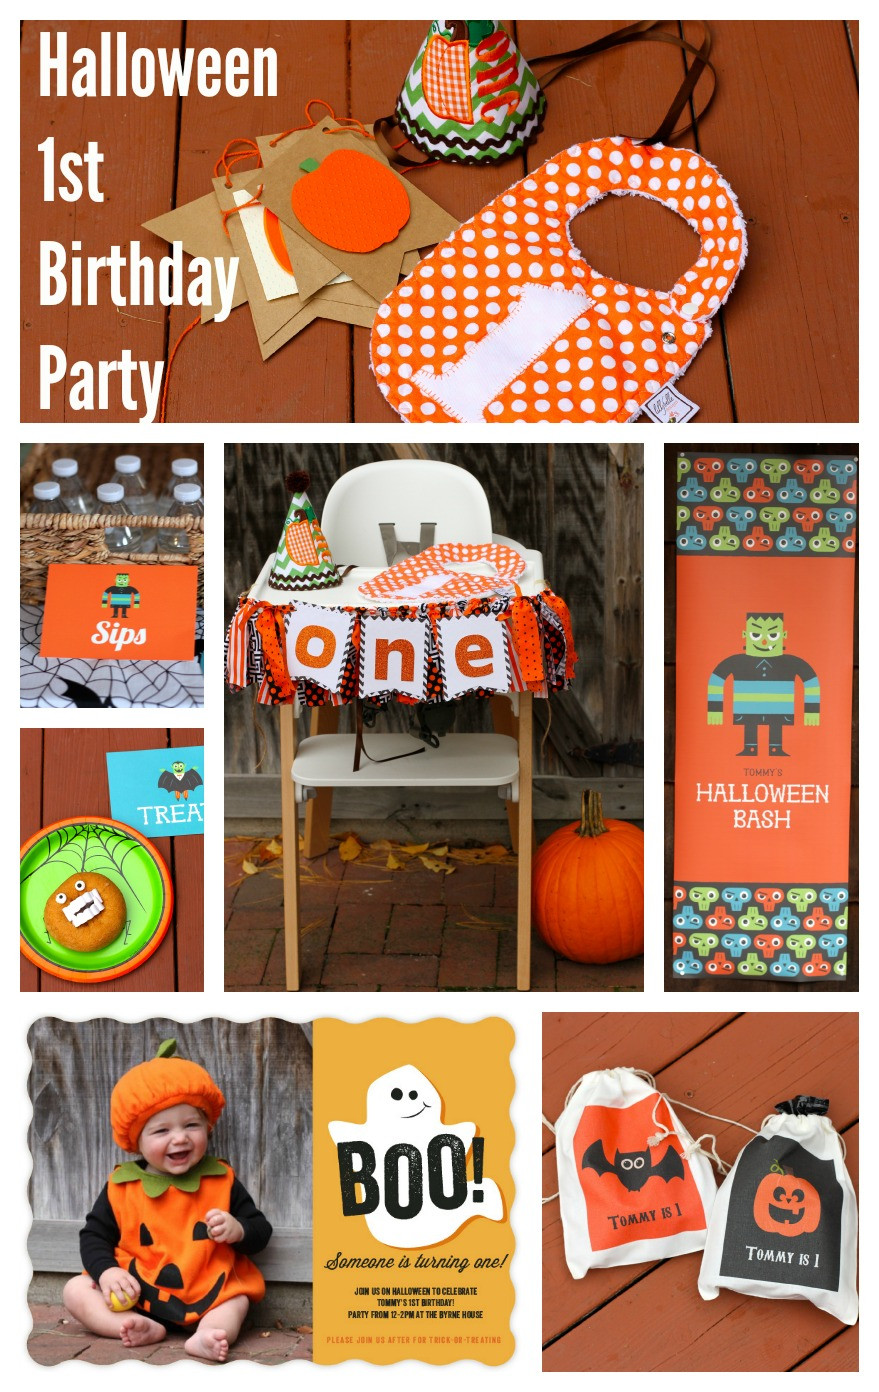 Halloween 1St Birthday Party Ideas
 A Halloween First Birthday Party Invites Decor and Party